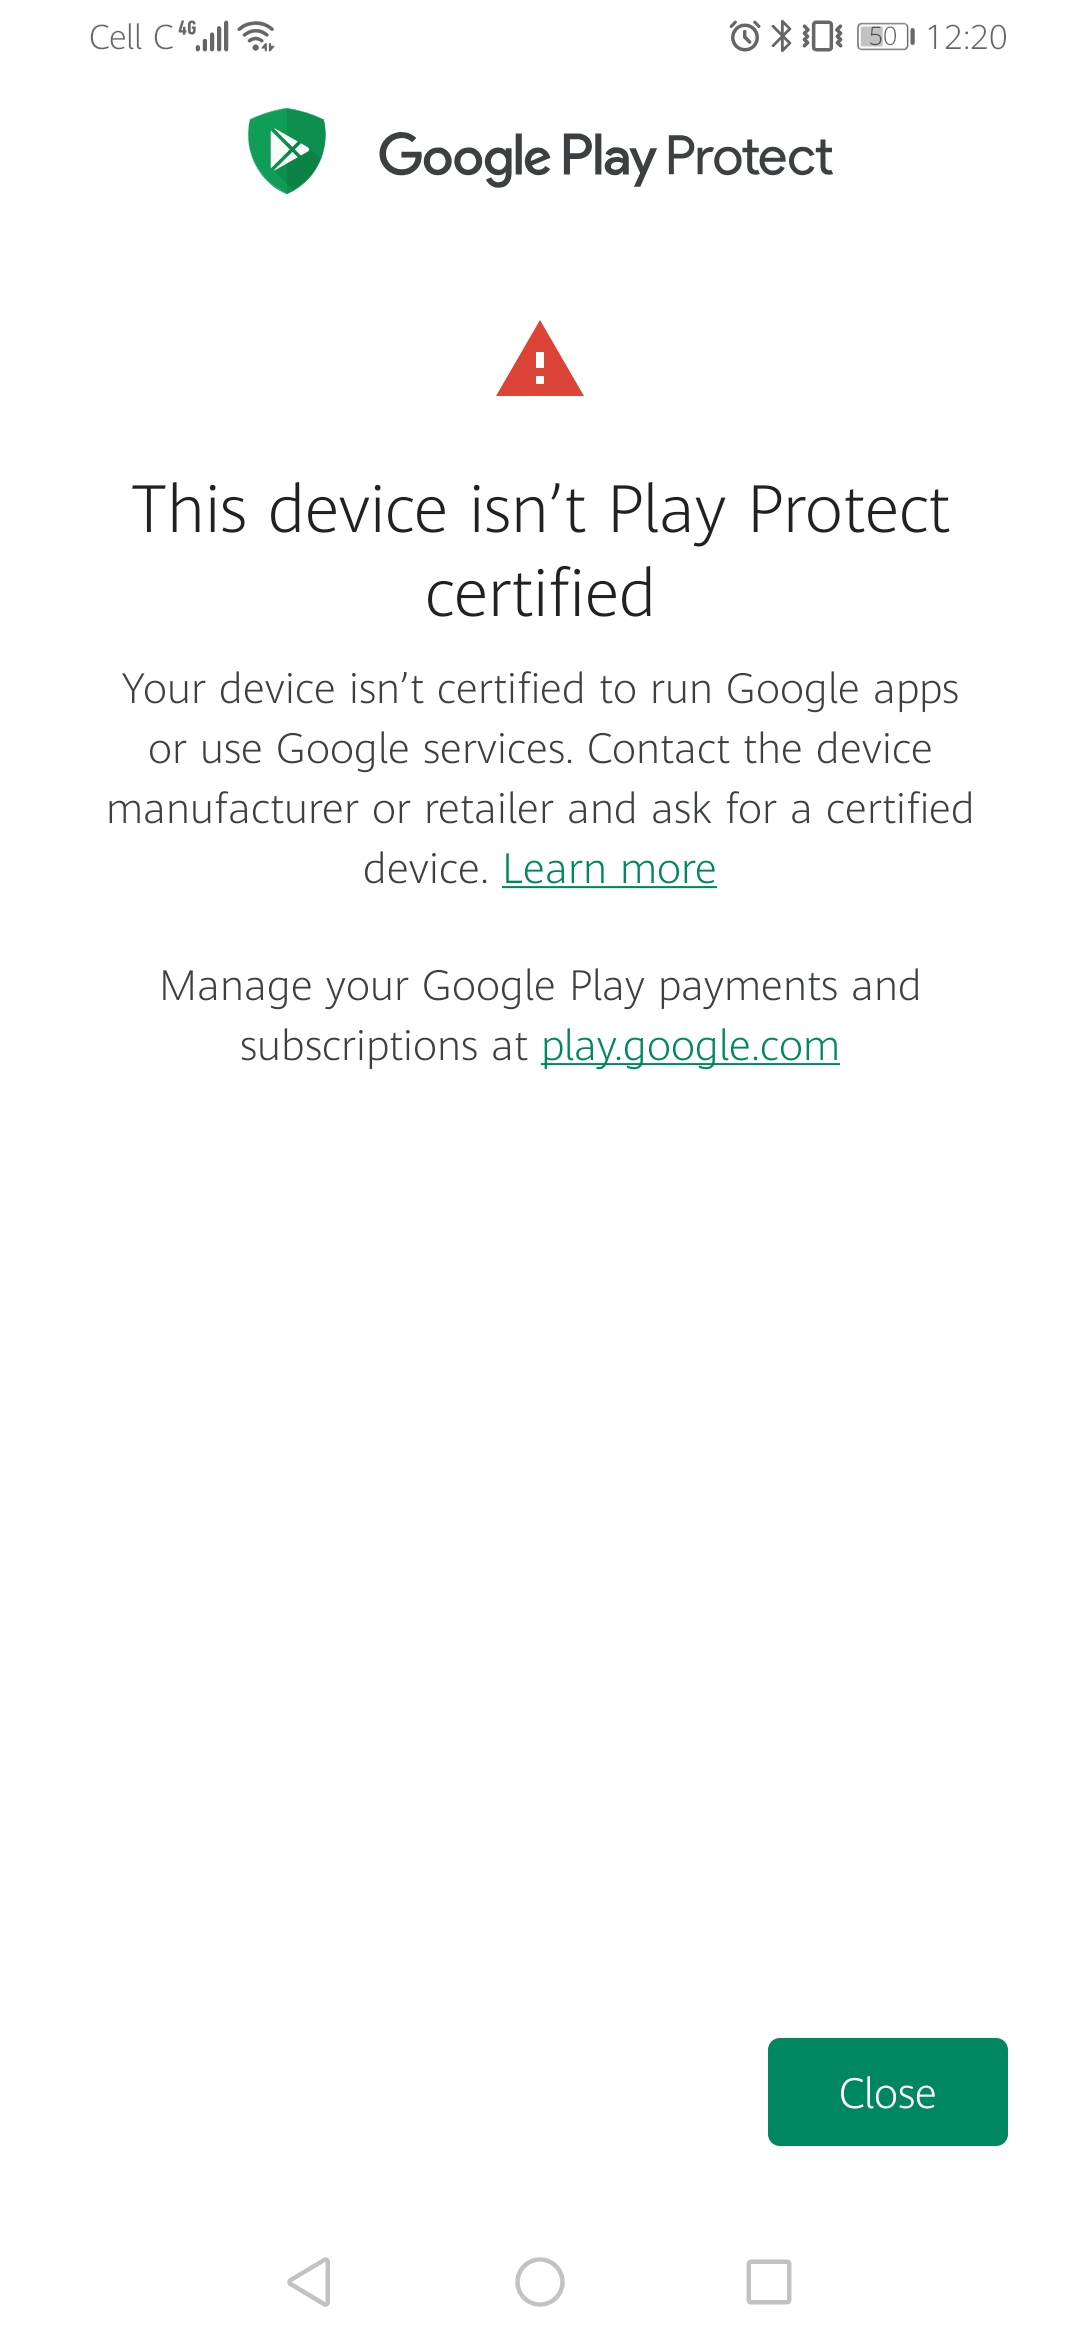 regisseur vallei Scherm Please help I can't sign into any of my Google accounts on my new phone  keeps giving pop ups - Android Community